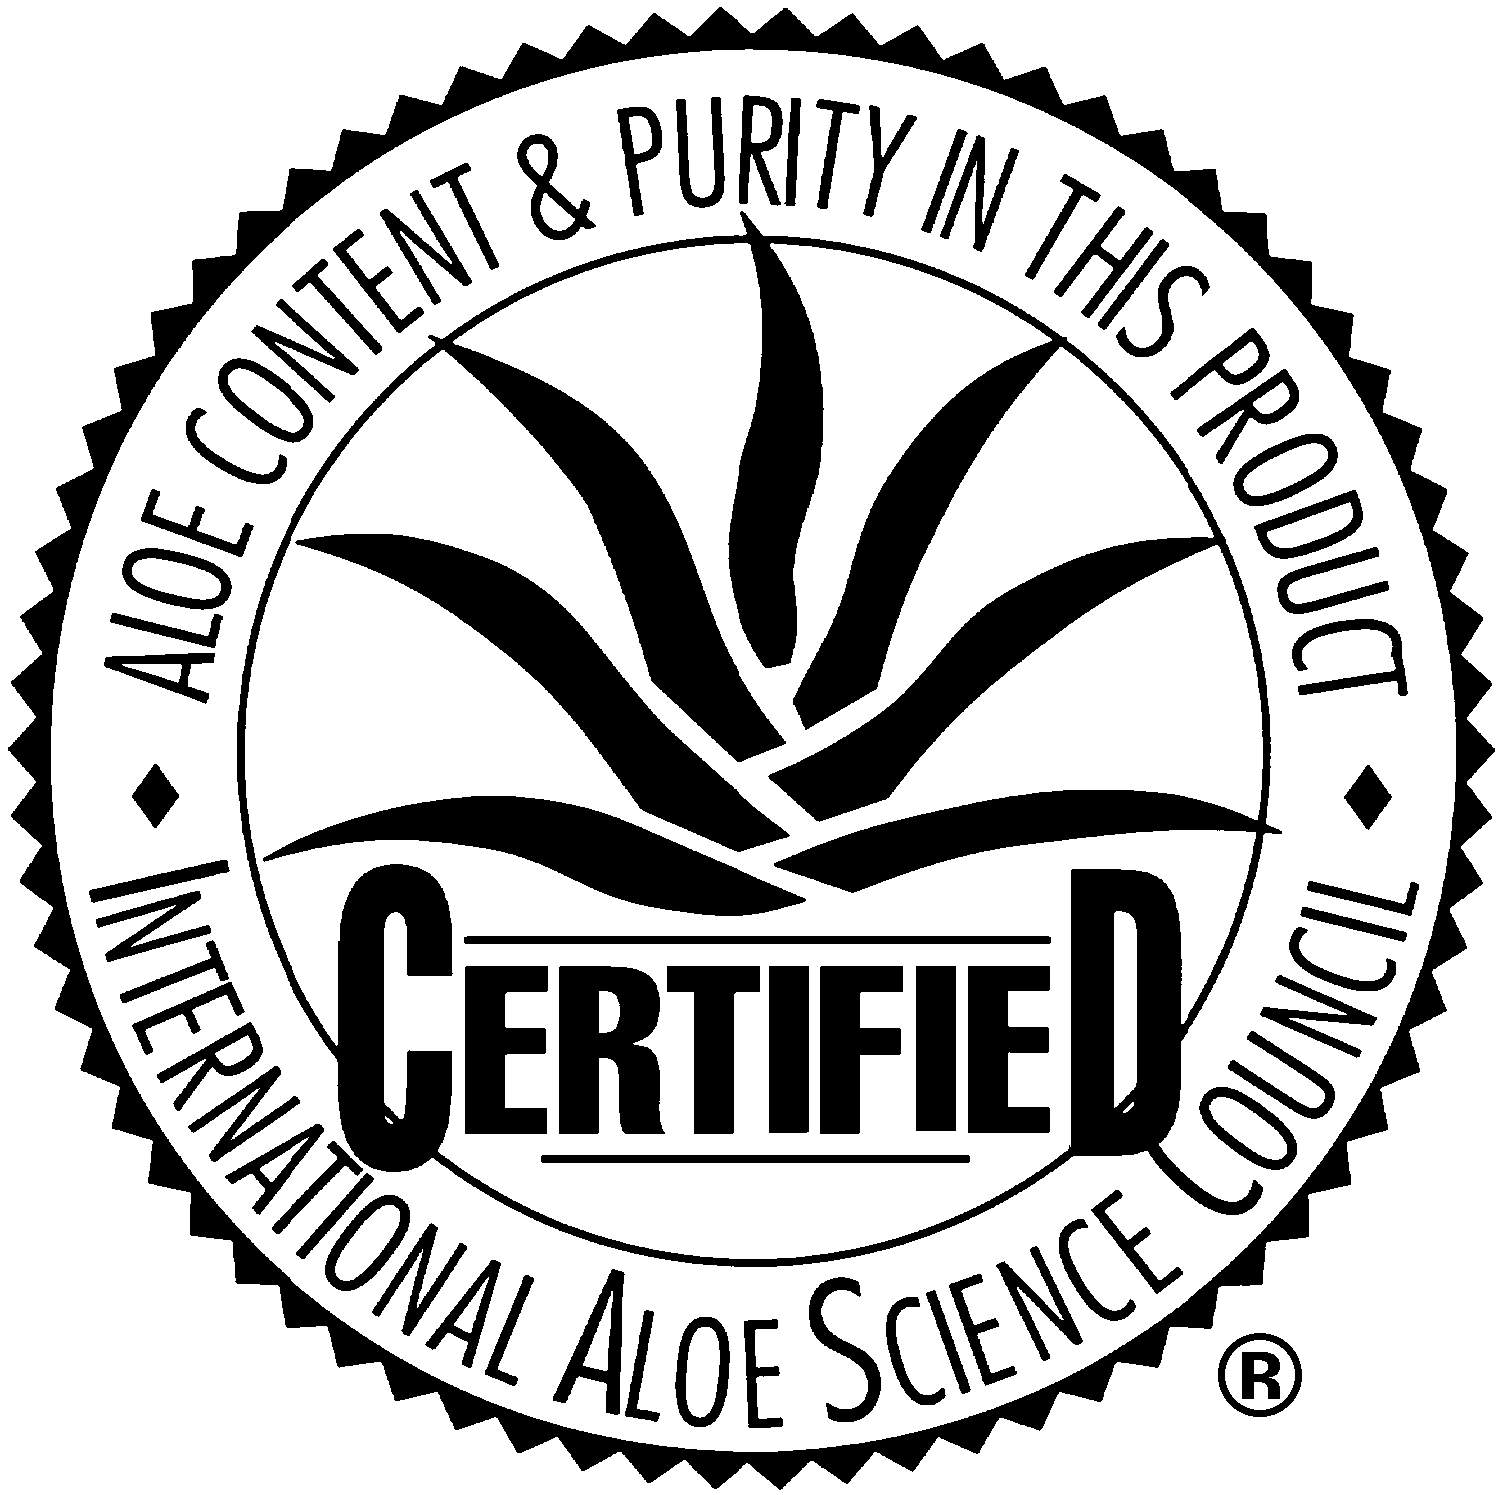 certified by the International Aloe science council